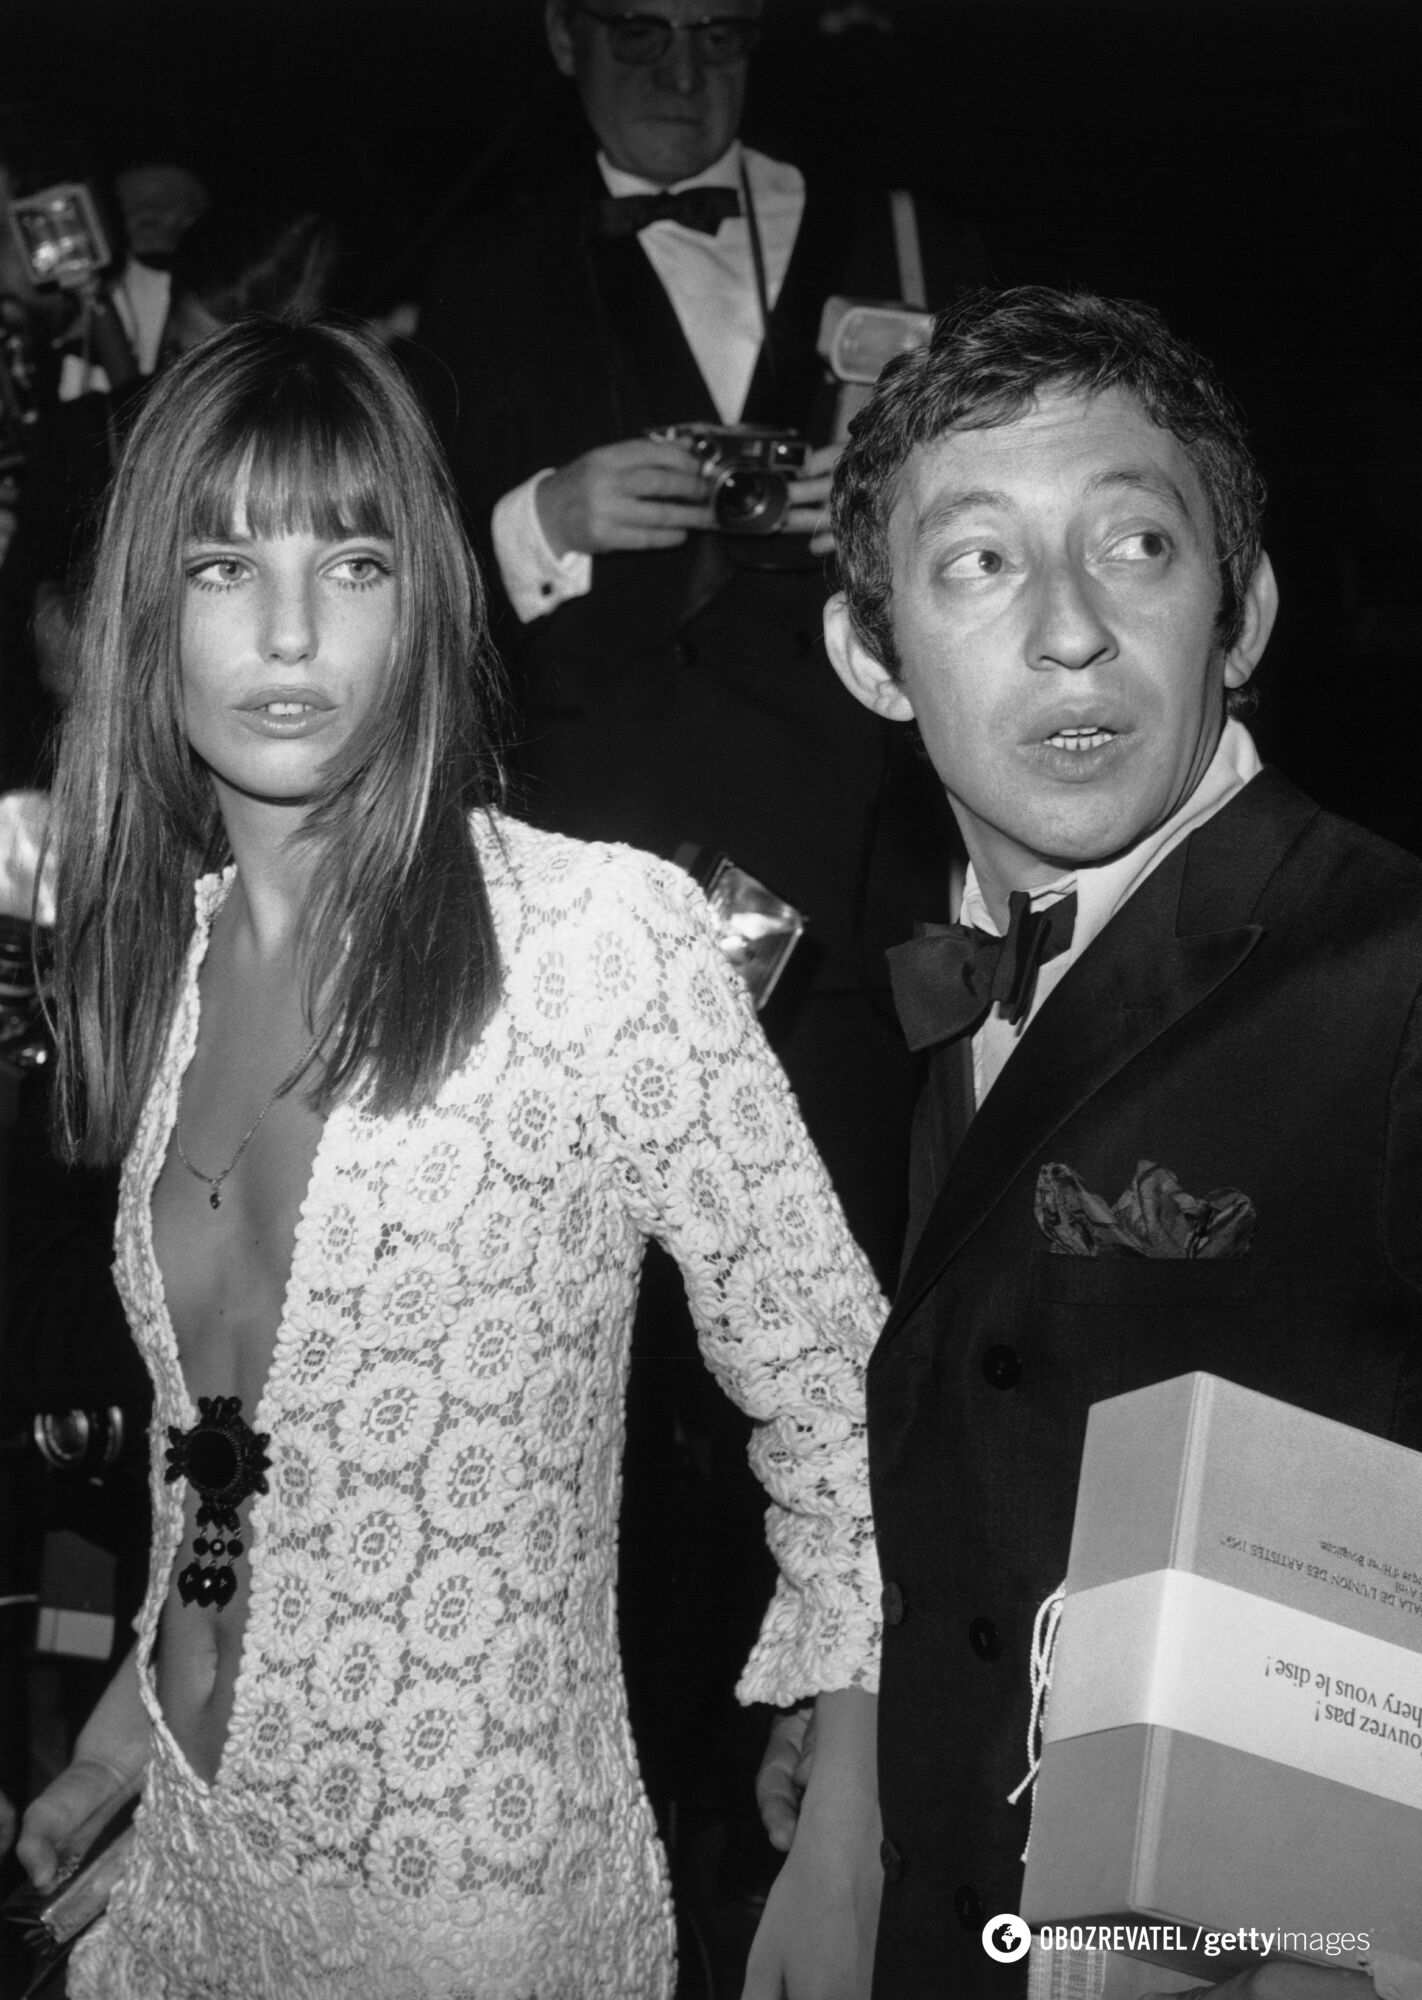 Legendary actress and singer Jane Birkin died: what she was famous for